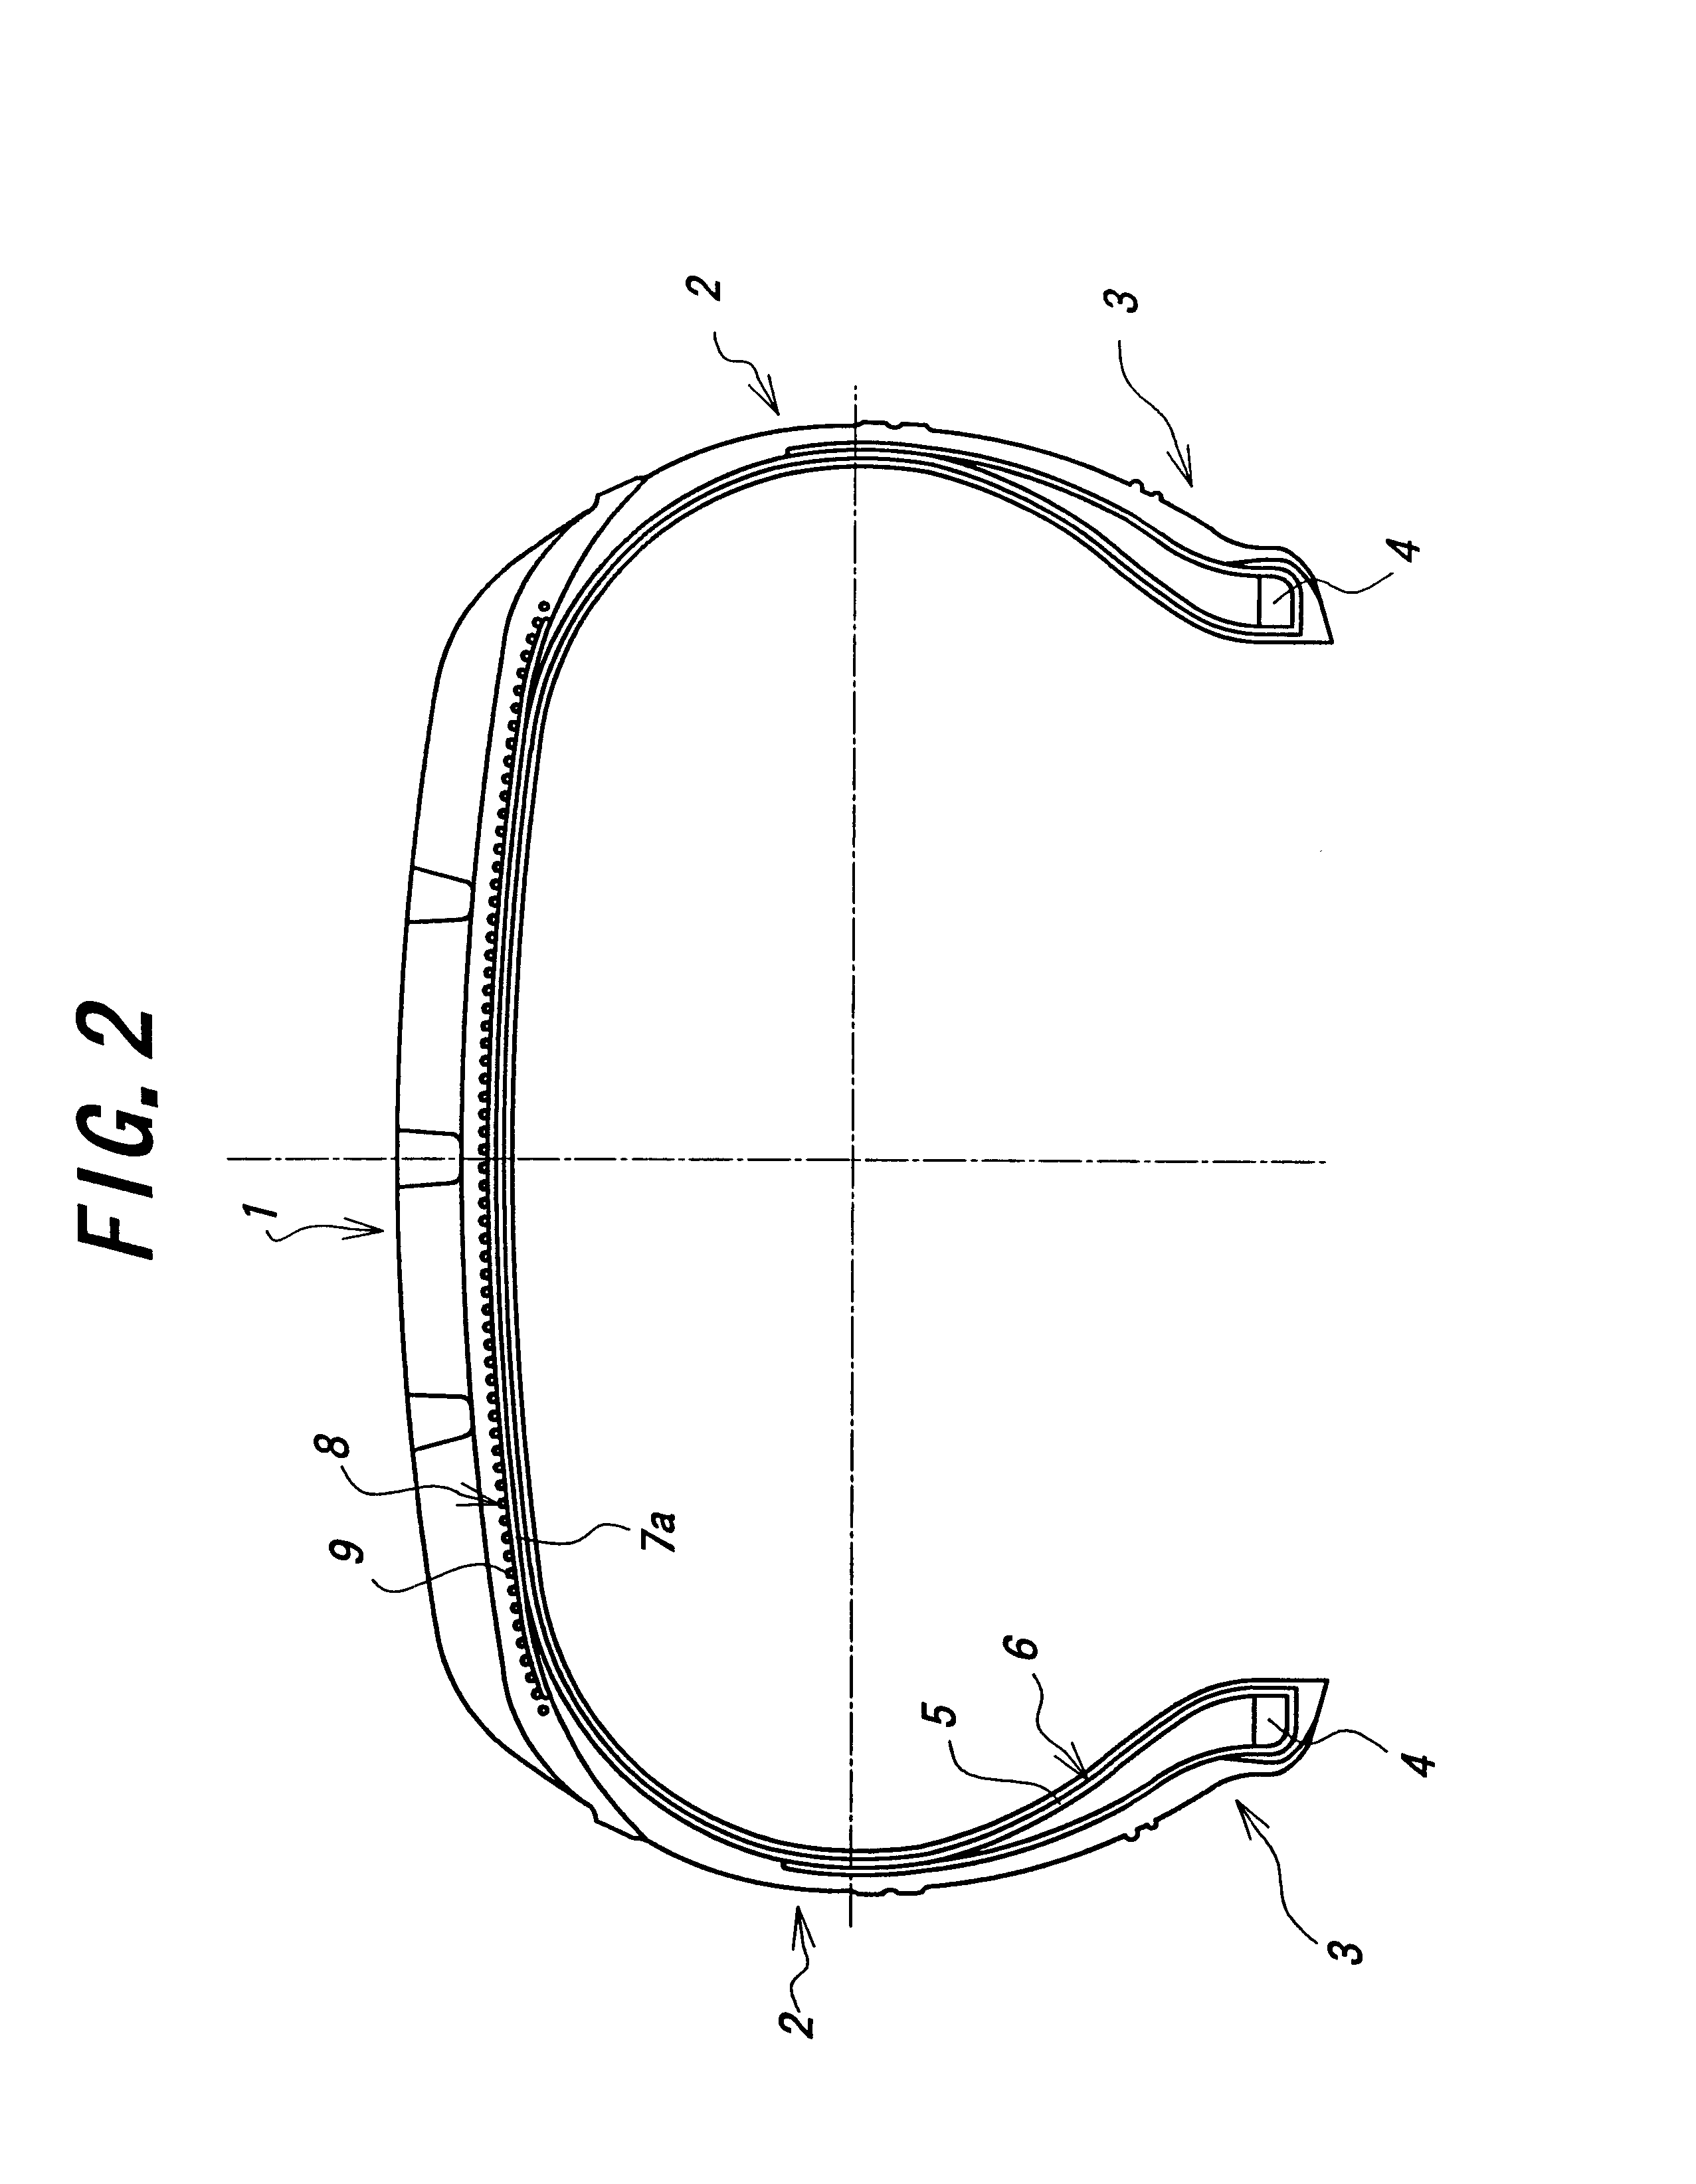 Pneumatic tire comprising carcass and belt of organic fiber cords with specified modulus of elasticity